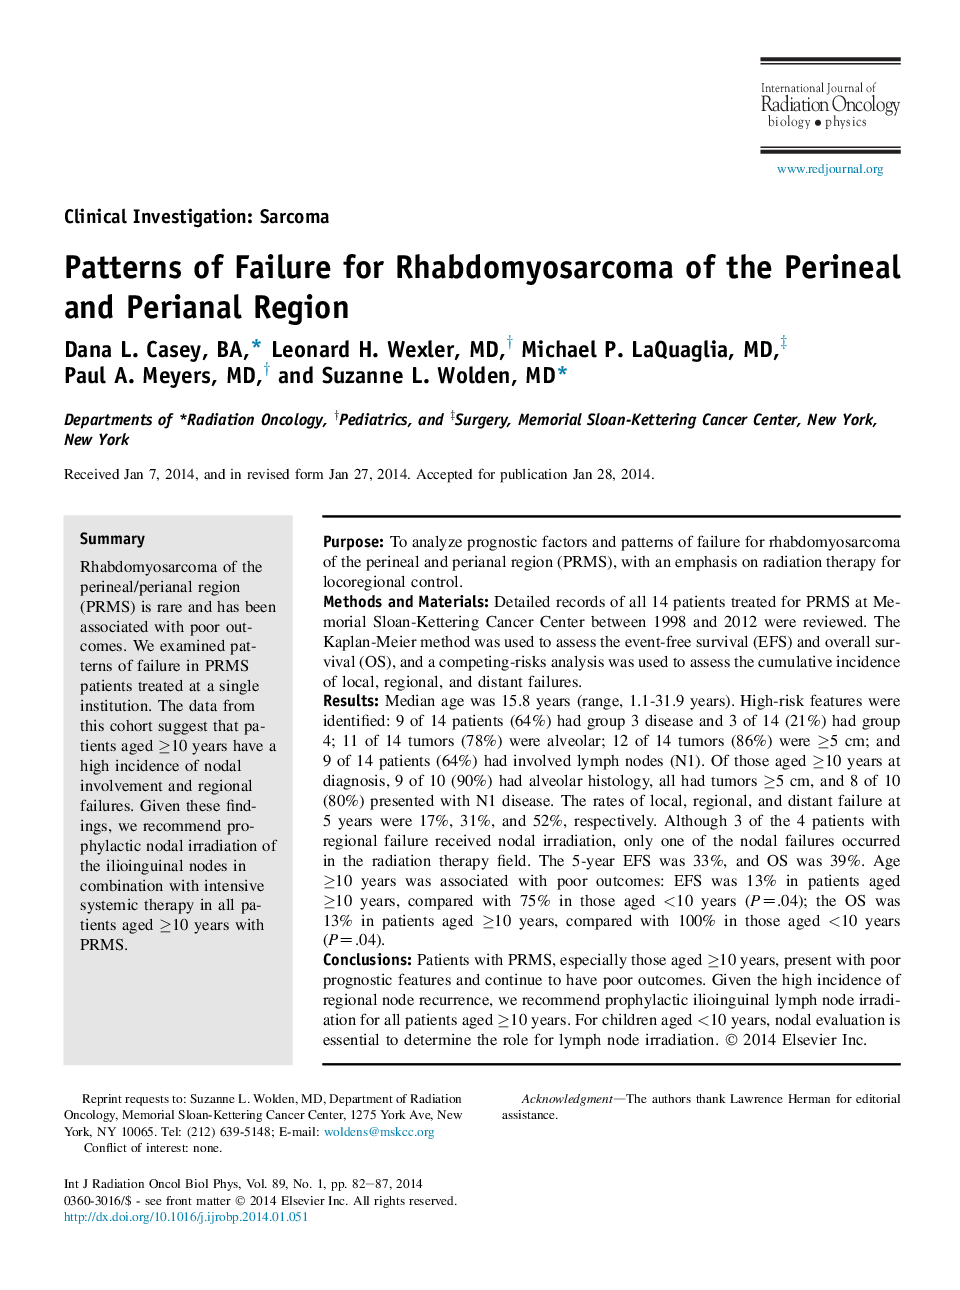 Patterns of Failure for Rhabdomyosarcoma of the Perineal and Perianal Region